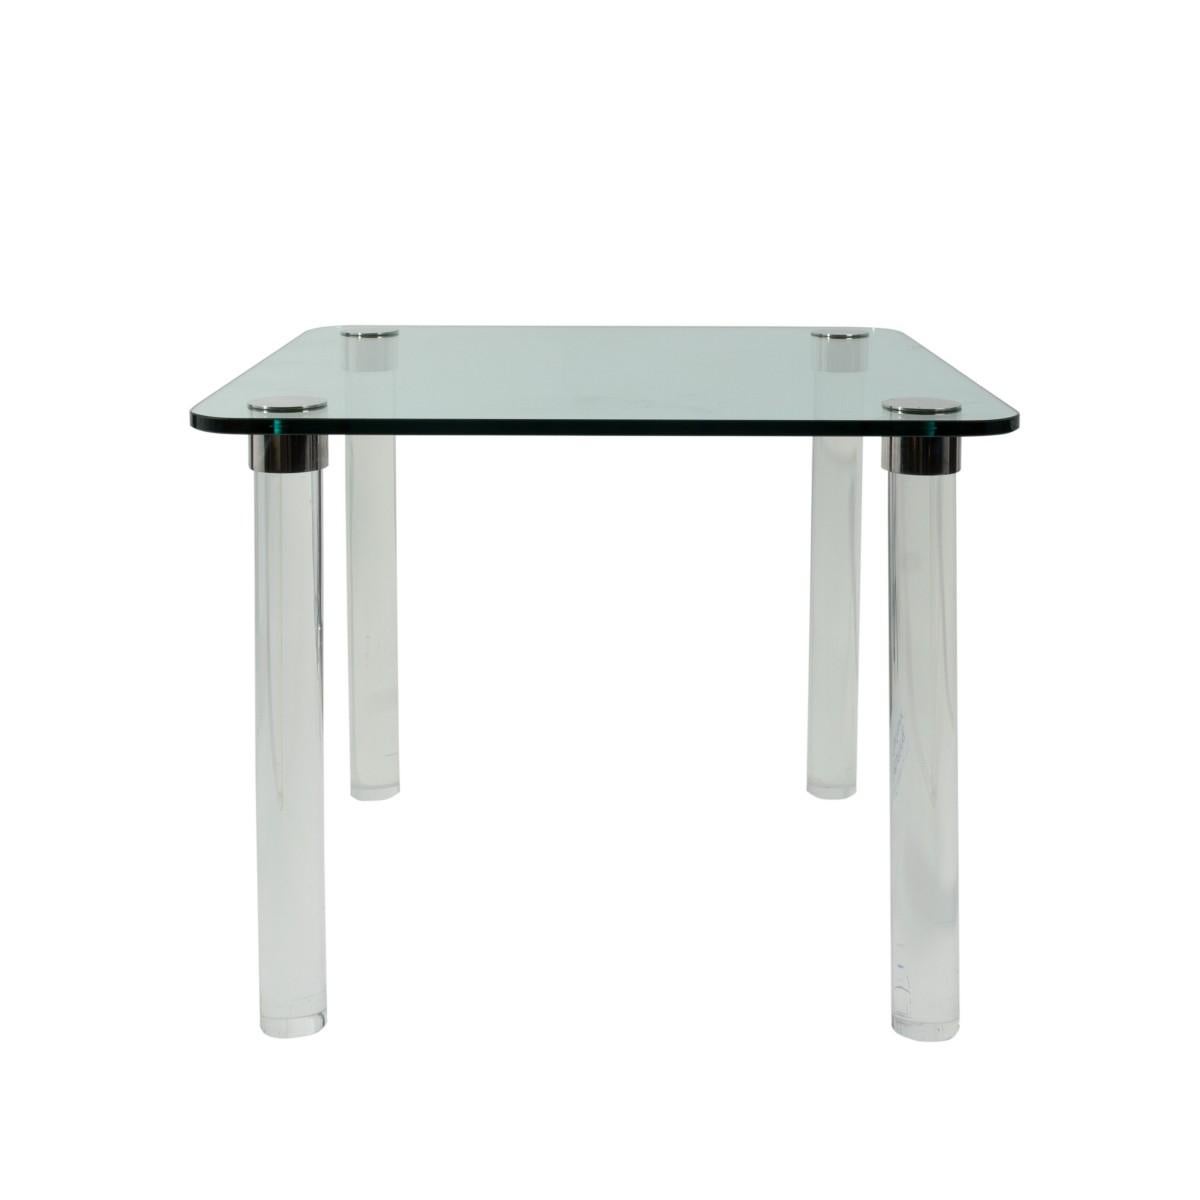 A Pace style dining or card table with a square glass top, Lucite legs and chrome fittings, USA, circa 1970.
     